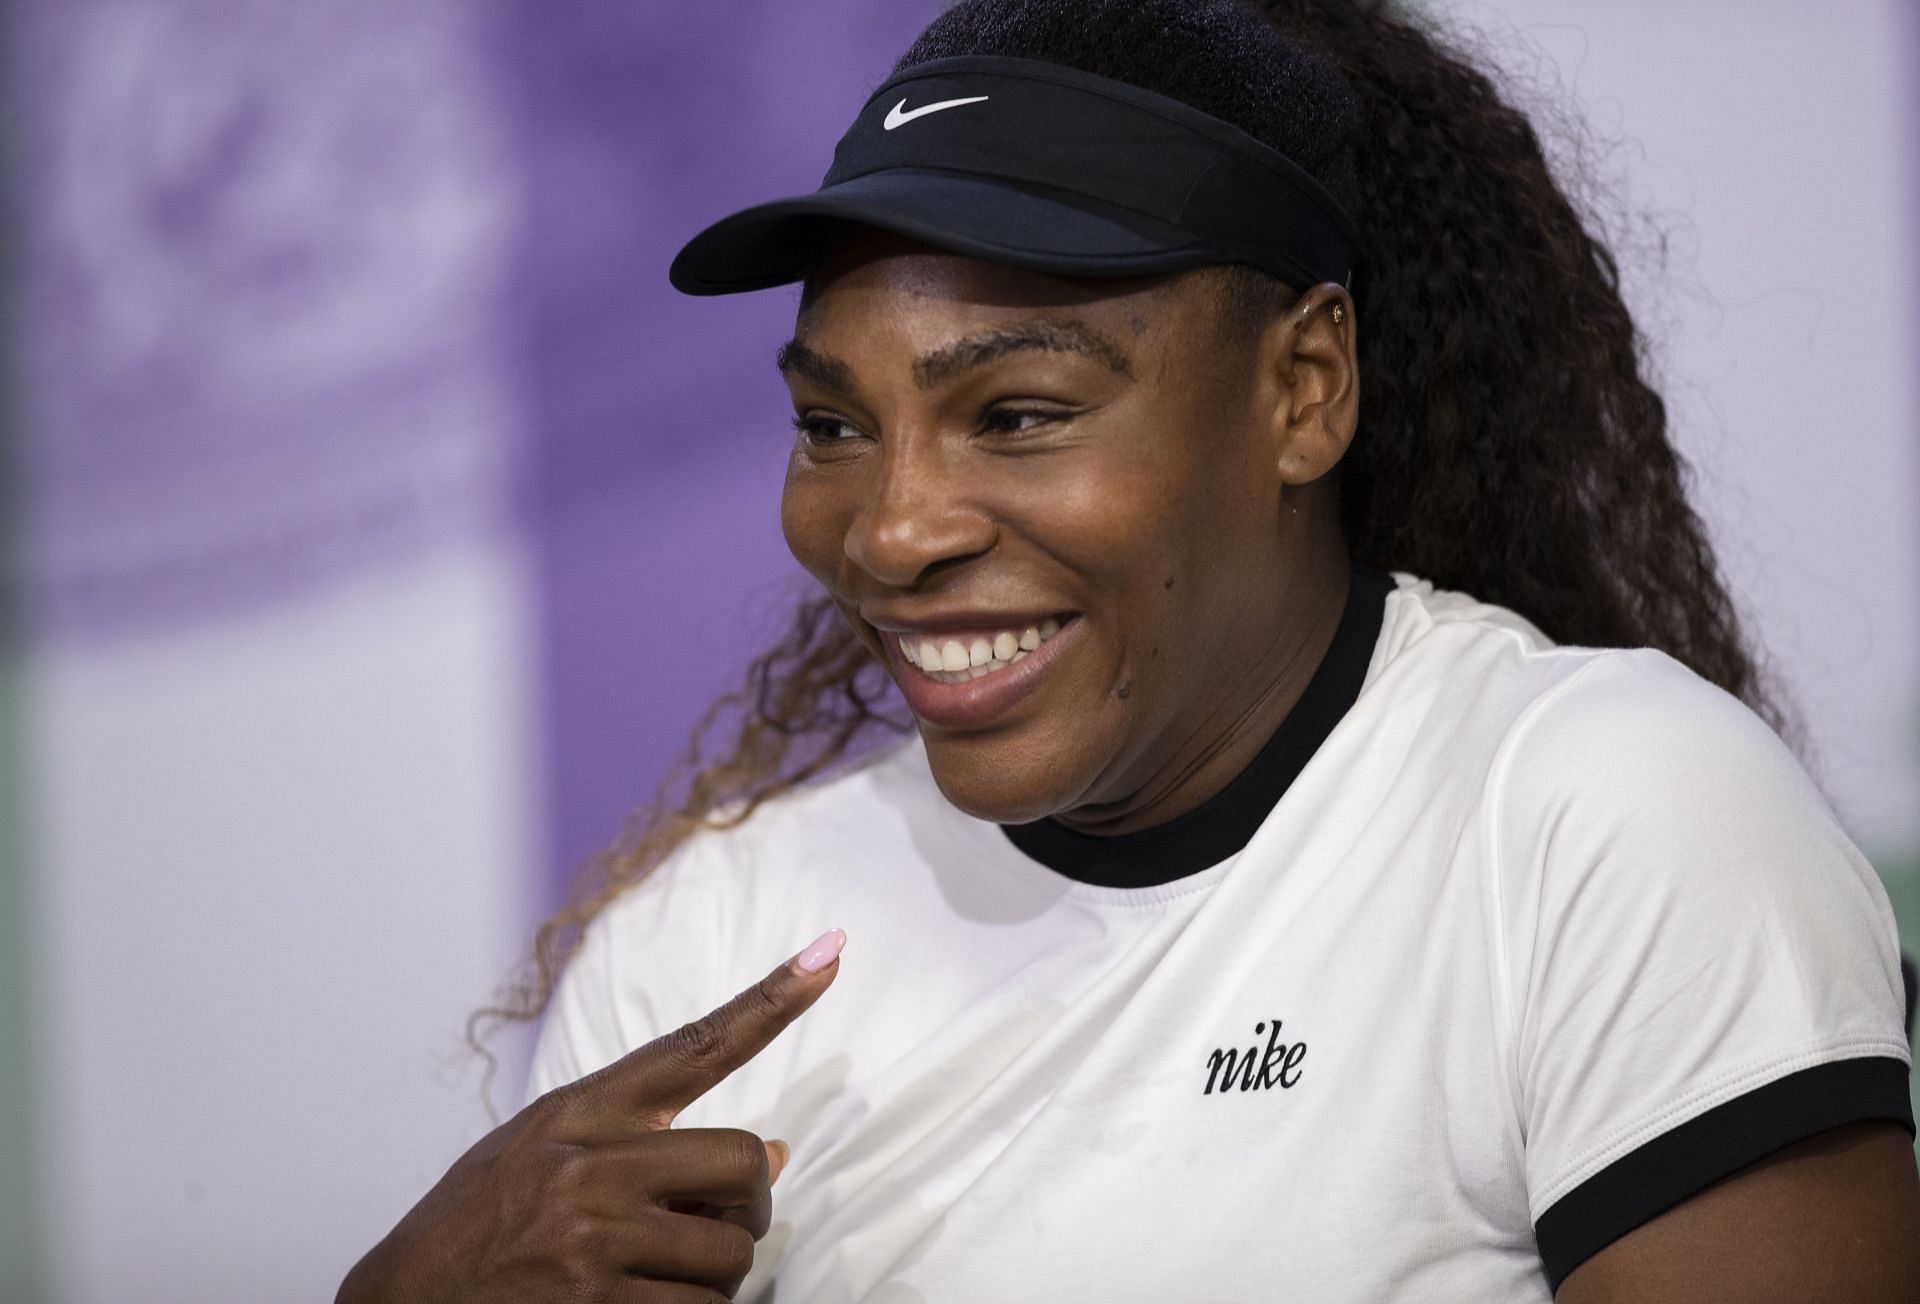 Serena Williams is looking forward to life post-retirement